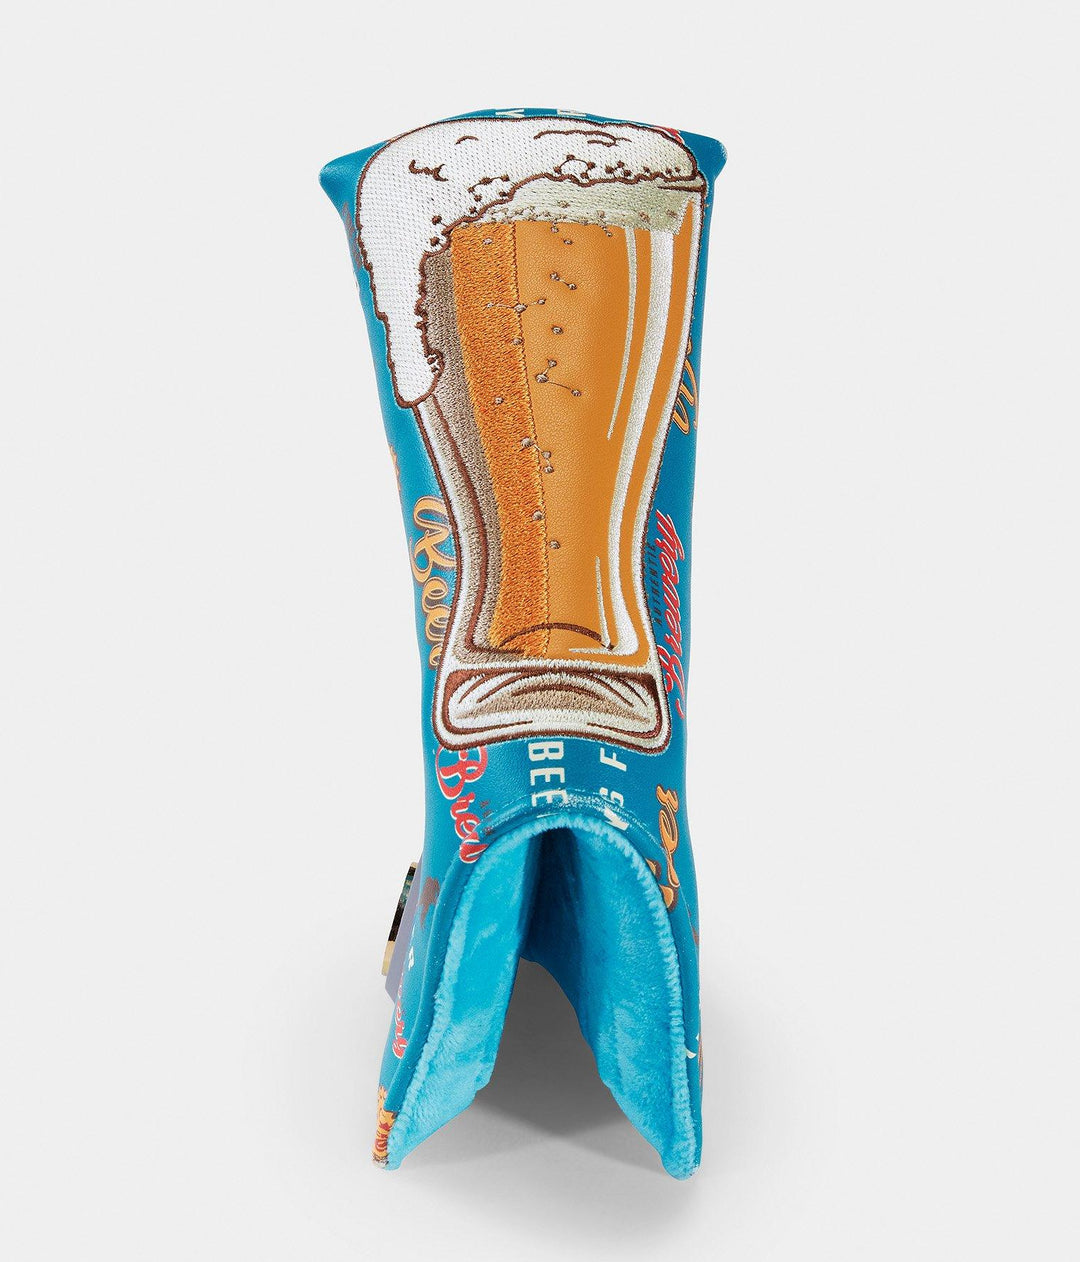 Fresh Beer Putter Cover